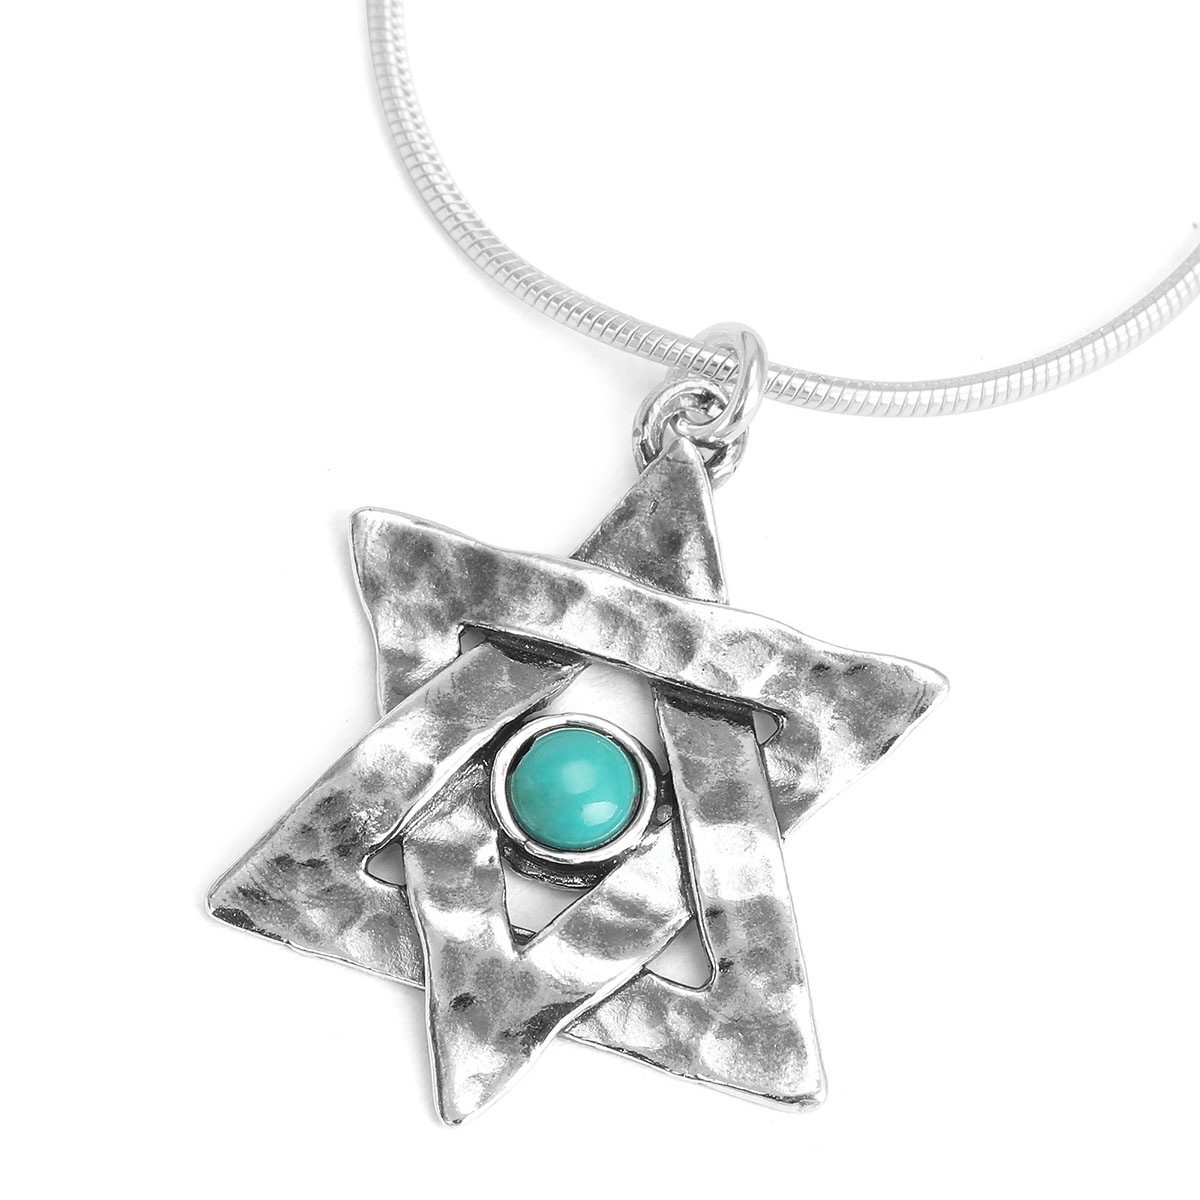 Modern Sterling Silver Star of David Necklace with Turquoise Stone - 1